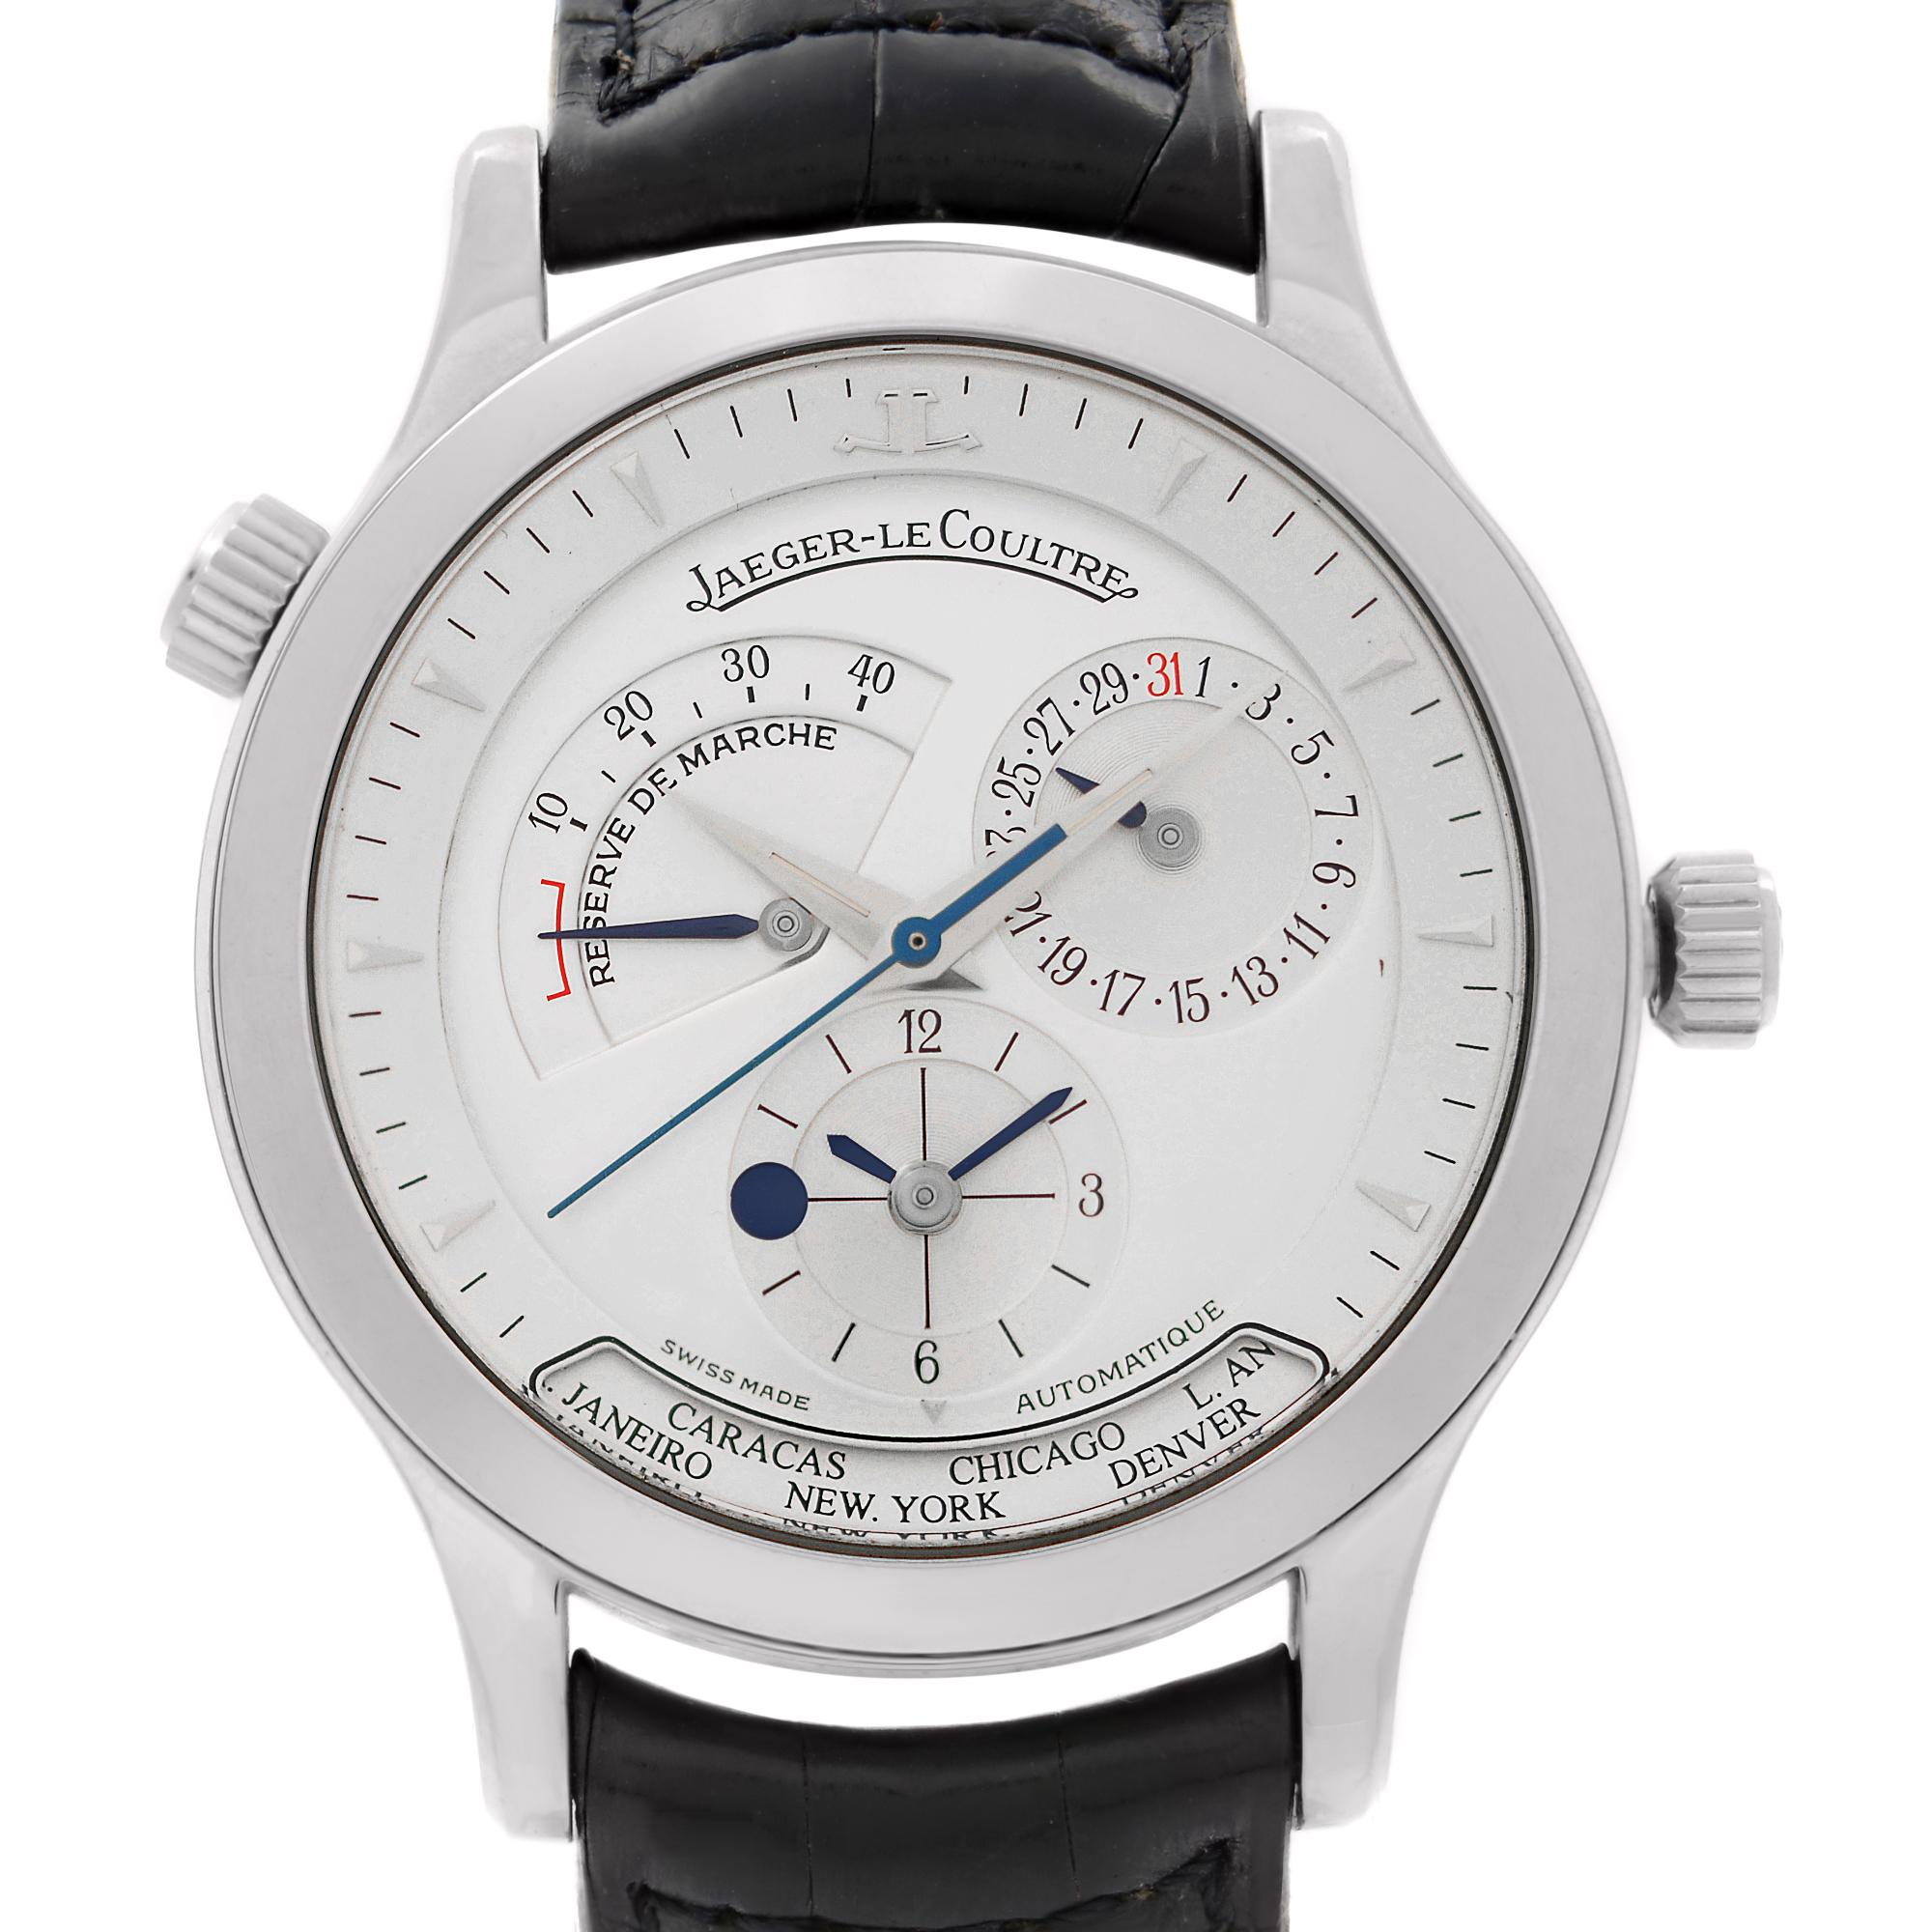 Pre-owned Jaeger-LeCoultre Master Geographic Automatic White Dial Men's Watch. Band Shows Minor Wear Signs on the inner sidee of the band.  No Original Box and Papers are Included. Comes with Chronostore Presentation Box and Authenticity Card.